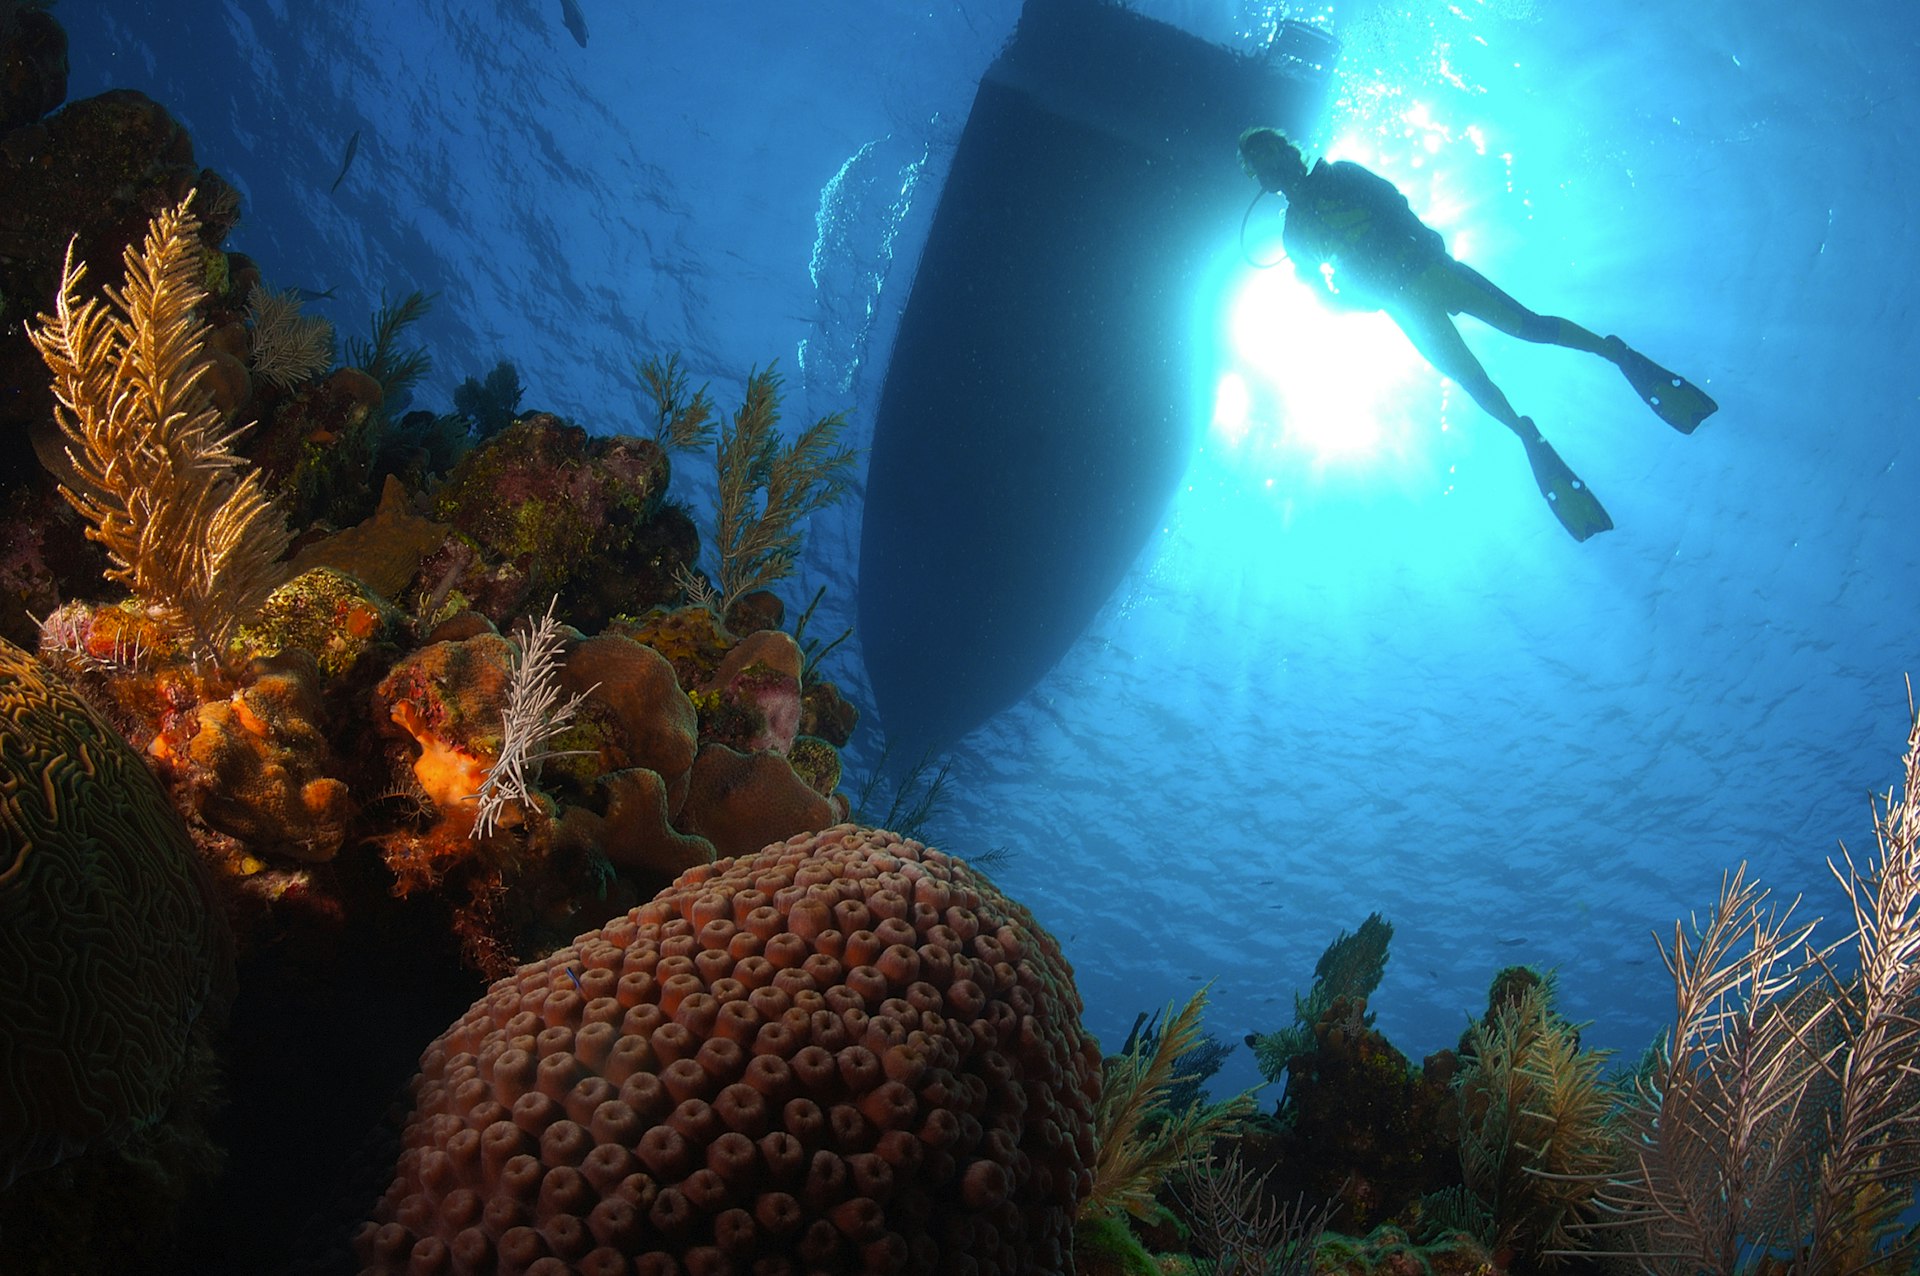 A scuba diver seen in silhouette from below next to the hull of a boat by the underwater coral reefs in Utila, Honduras